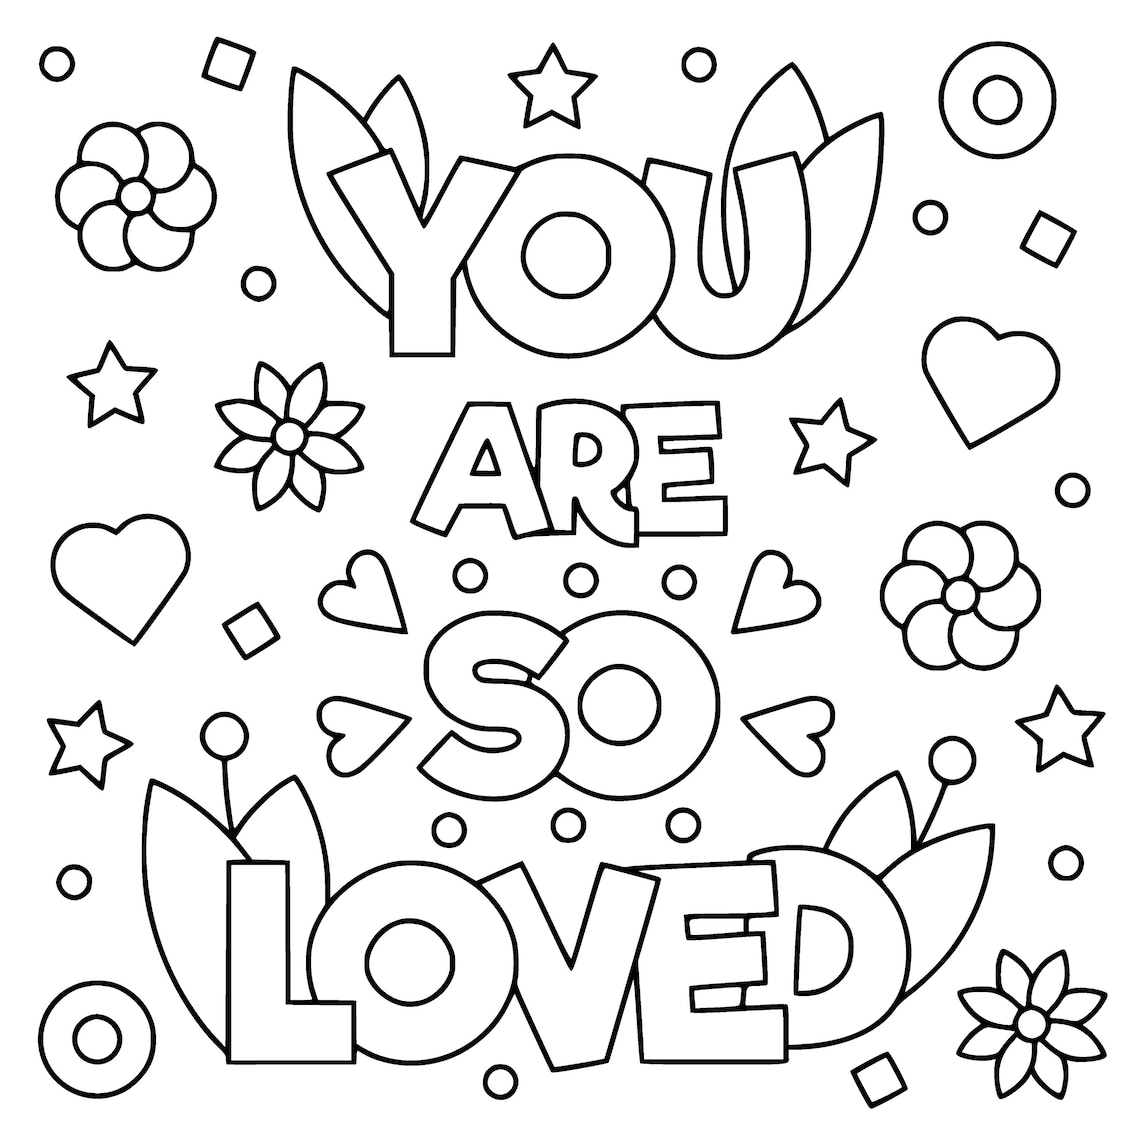 Inspirational PDF Coloring Pages, Positive Message Printable, Self ...